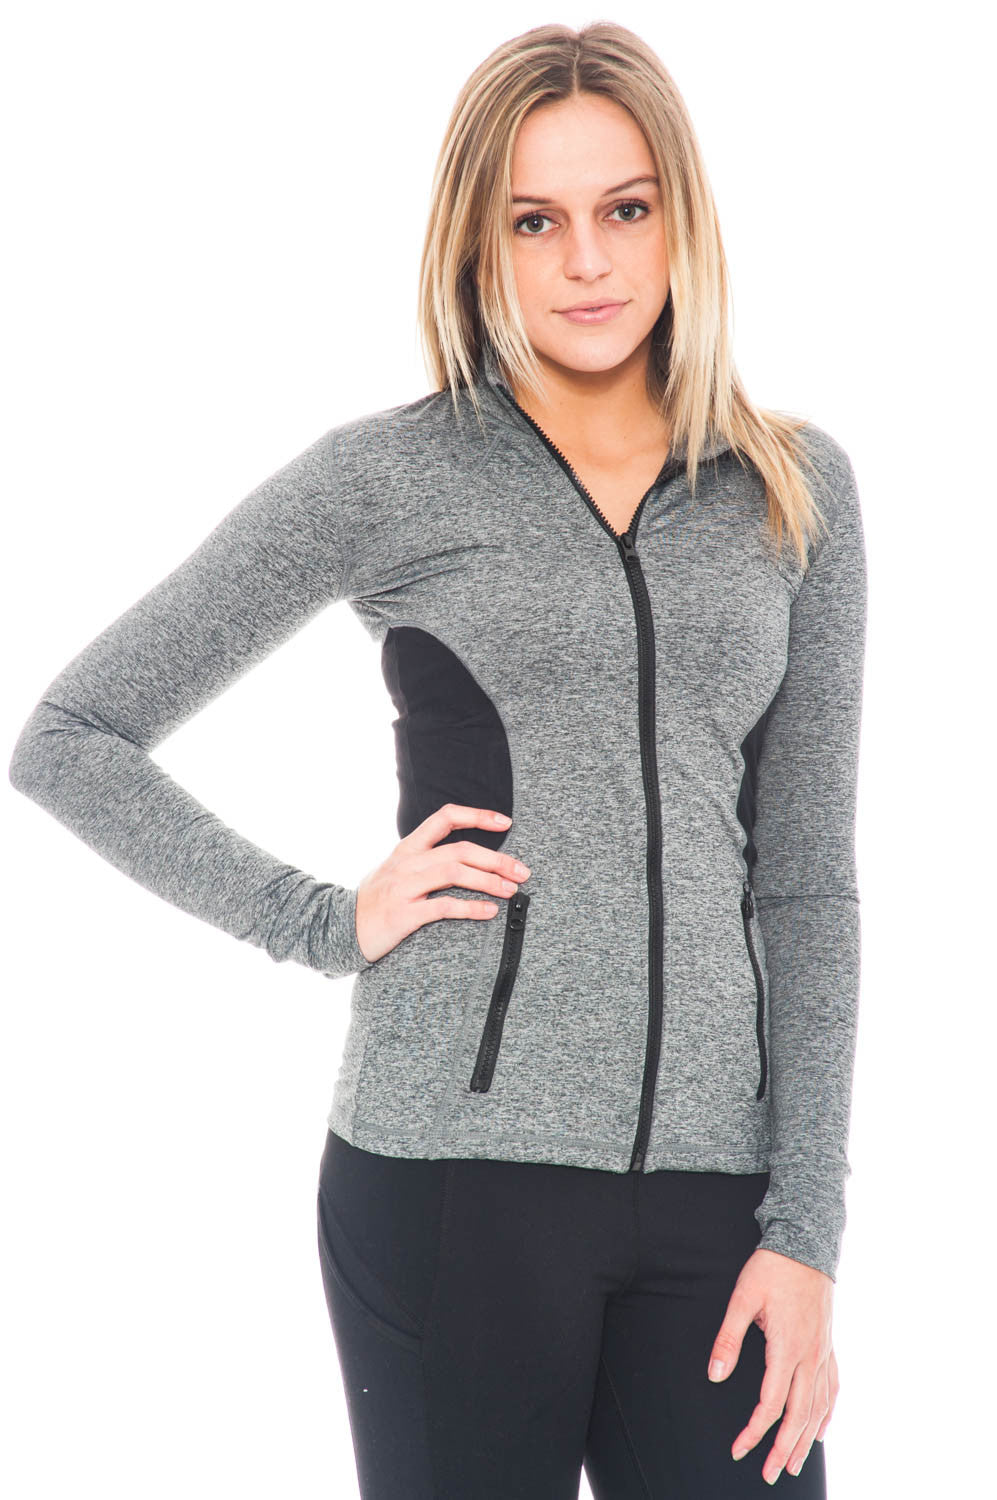 Jacket - Sports Zip-Up Activewear Top by Motion by Coalition